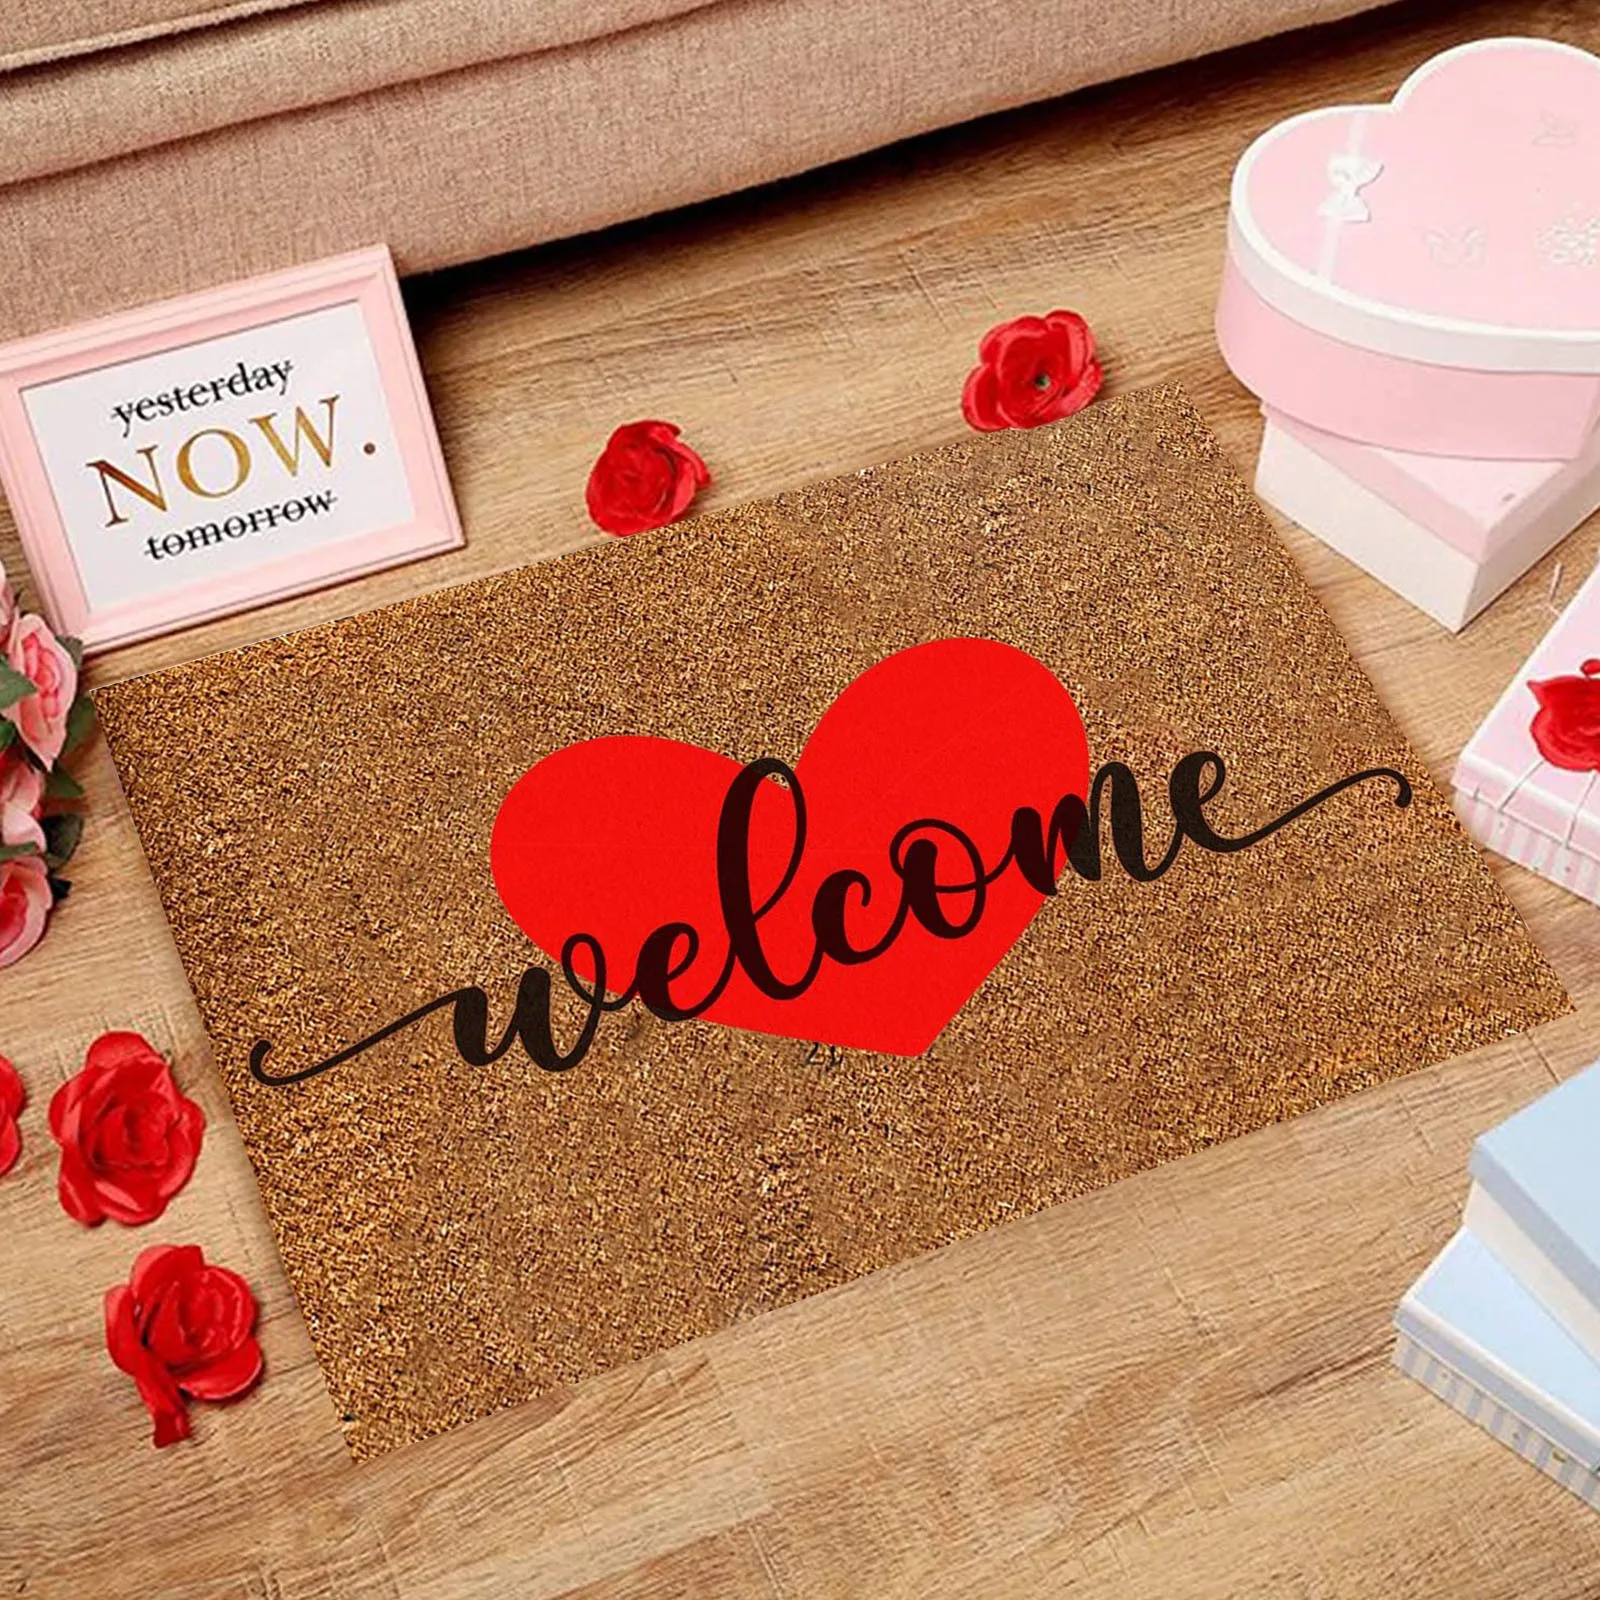 Red Home Heart Welcome Door Mat Front Bathroom Porch Rug Valentine's Day Decor 